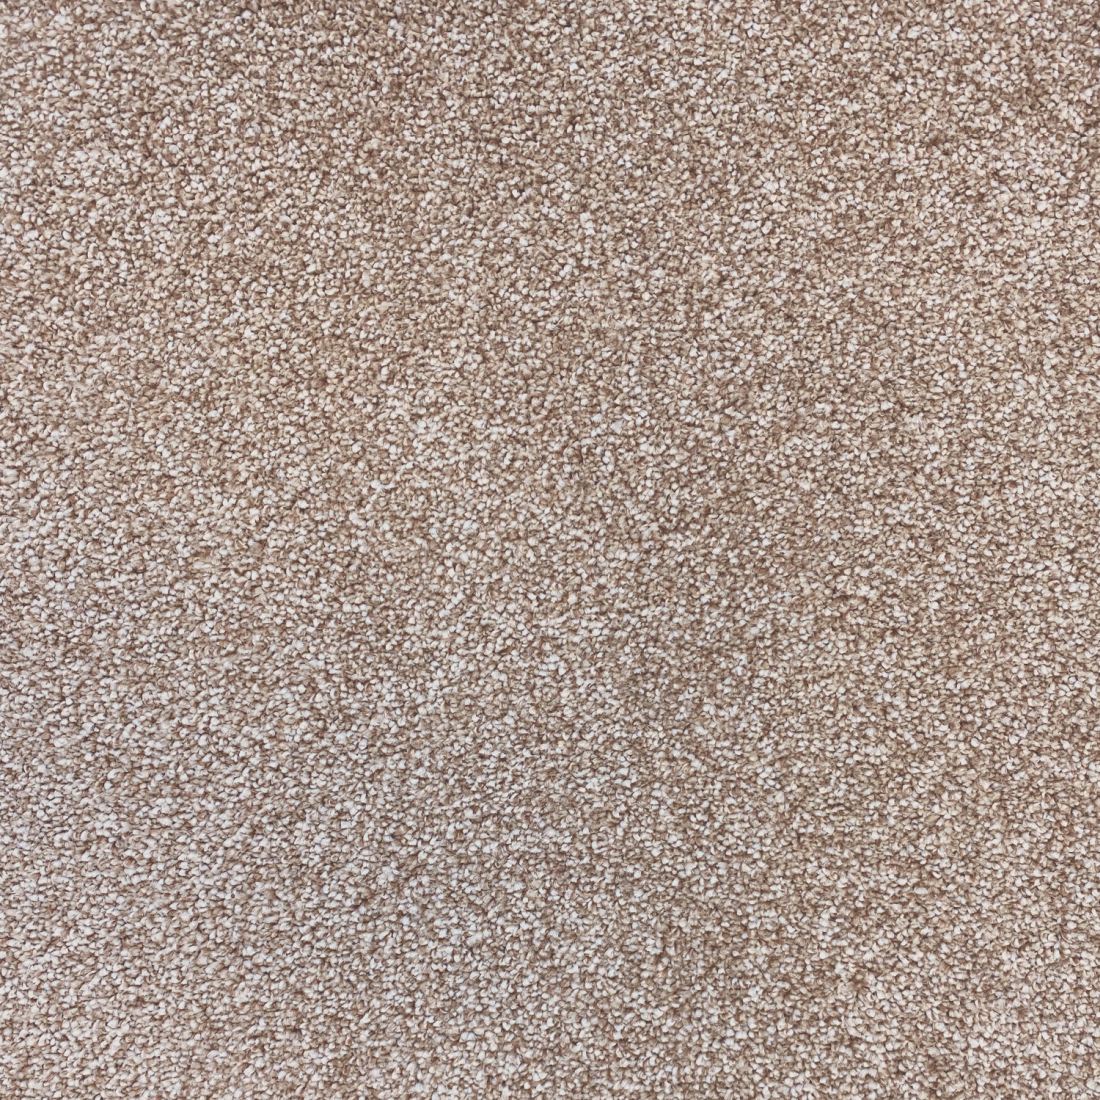 Invincible Rustic Stain Resistant Twist Carpet - Summer Straw